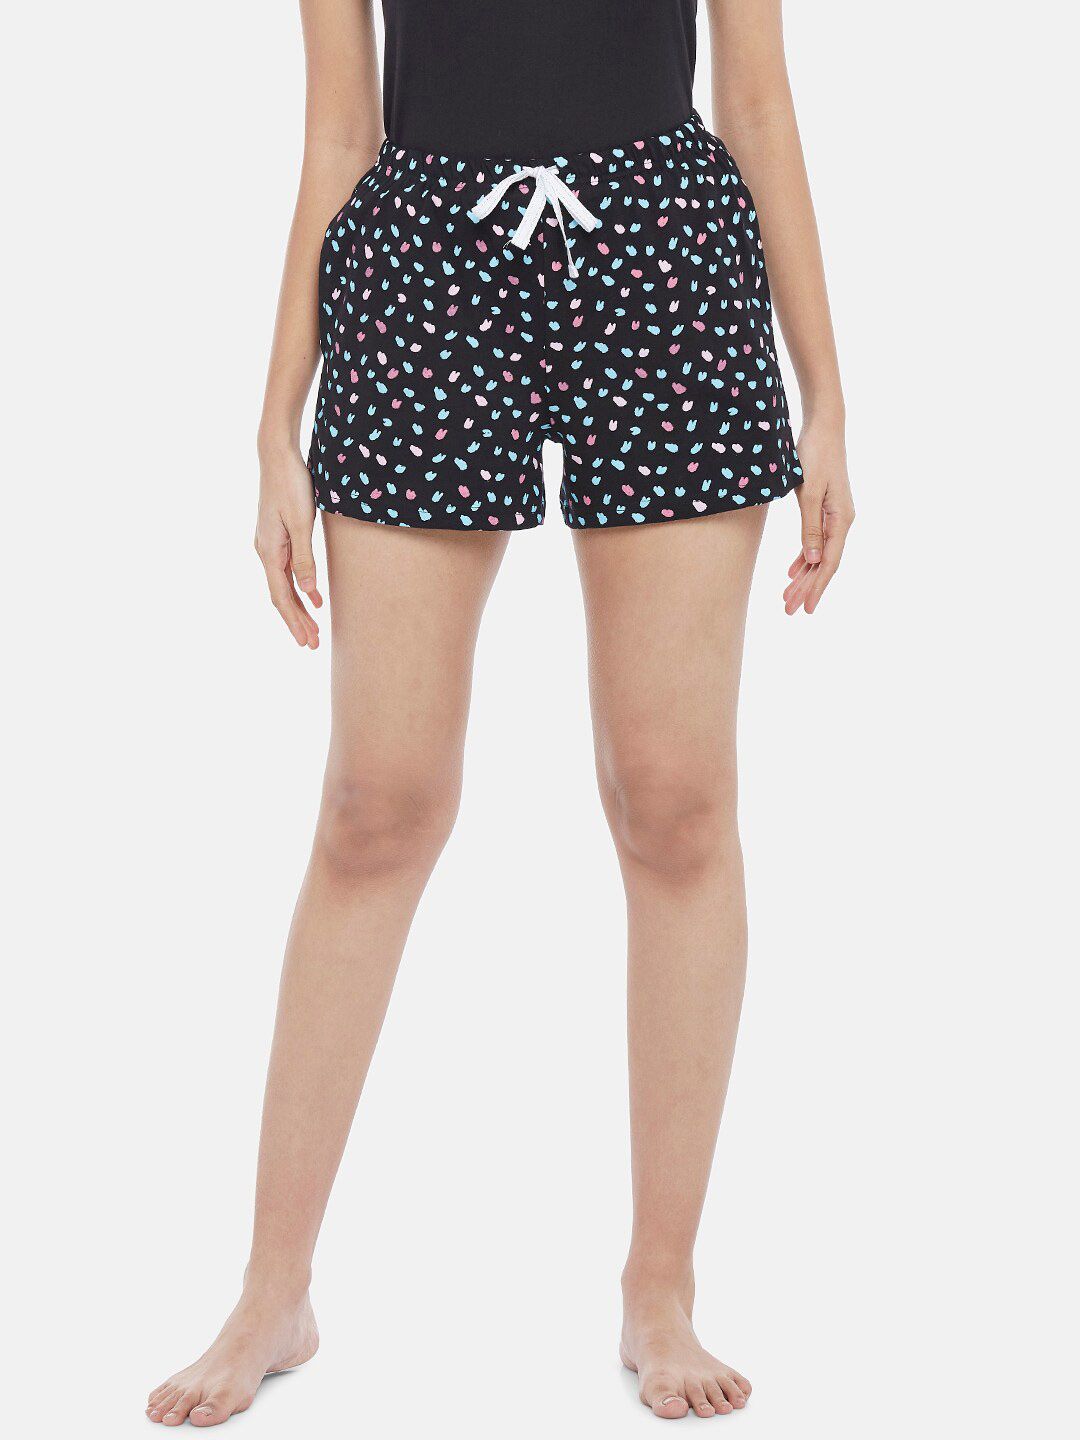 Dreamz by Pantaloons Women Black Printed Cotton Lounge Shorts Price in India